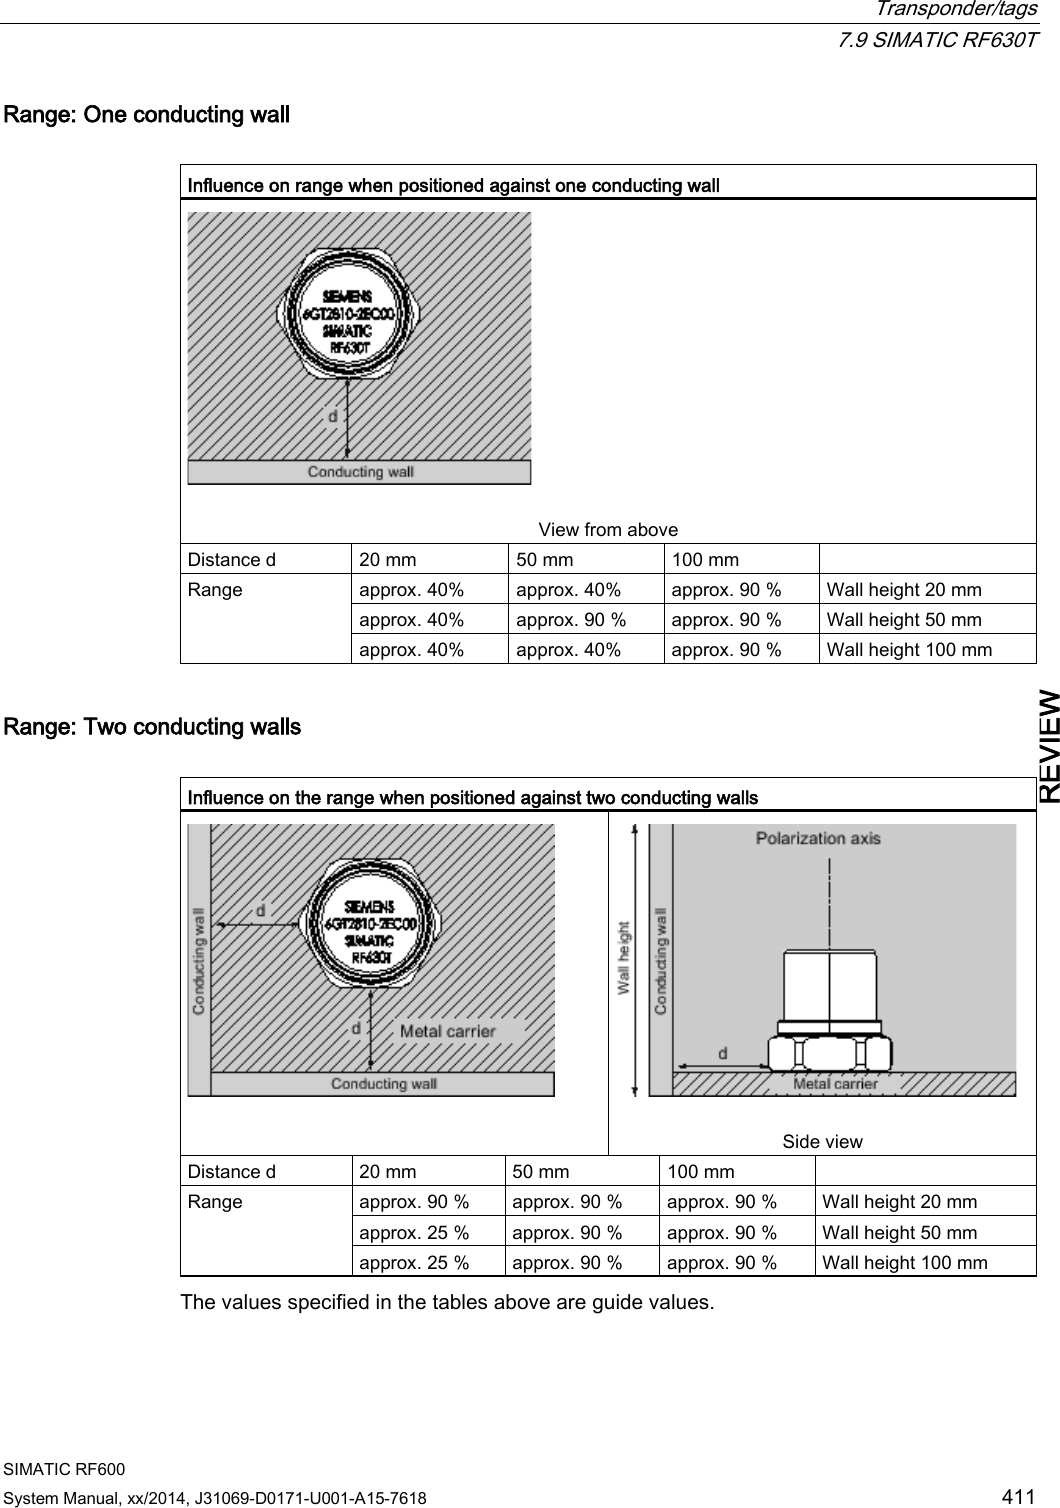  Transponder/tags  7.9 SIMATIC RF630T SIMATIC RF600 System Manual, xx/2014, J31069-D0171-U001-A15-7618 411 REVIEW Range: One conducting wall  Influence on range when positioned against one conducting wall   View from above  Distance d 20 mm 50 mm 100 mm  Range approx. 40% approx. 40% approx. 90 % Wall height 20 mm approx. 40% approx. 90 % approx. 90 % Wall height 50 mm approx. 40% approx. 40% approx. 90 % Wall height 100 mm Range: Two conducting walls  Influence on the range when positioned against two conducting walls     Side view Distance d 20 mm 50 mm 100 mm  Range approx. 90 % approx. 90 % approx. 90 % Wall height 20 mm approx. 25 % approx. 90 % approx. 90 % Wall height 50 mm approx. 25 % approx. 90 % approx. 90 % Wall height 100 mm The values specified in the tables above are guide values.  